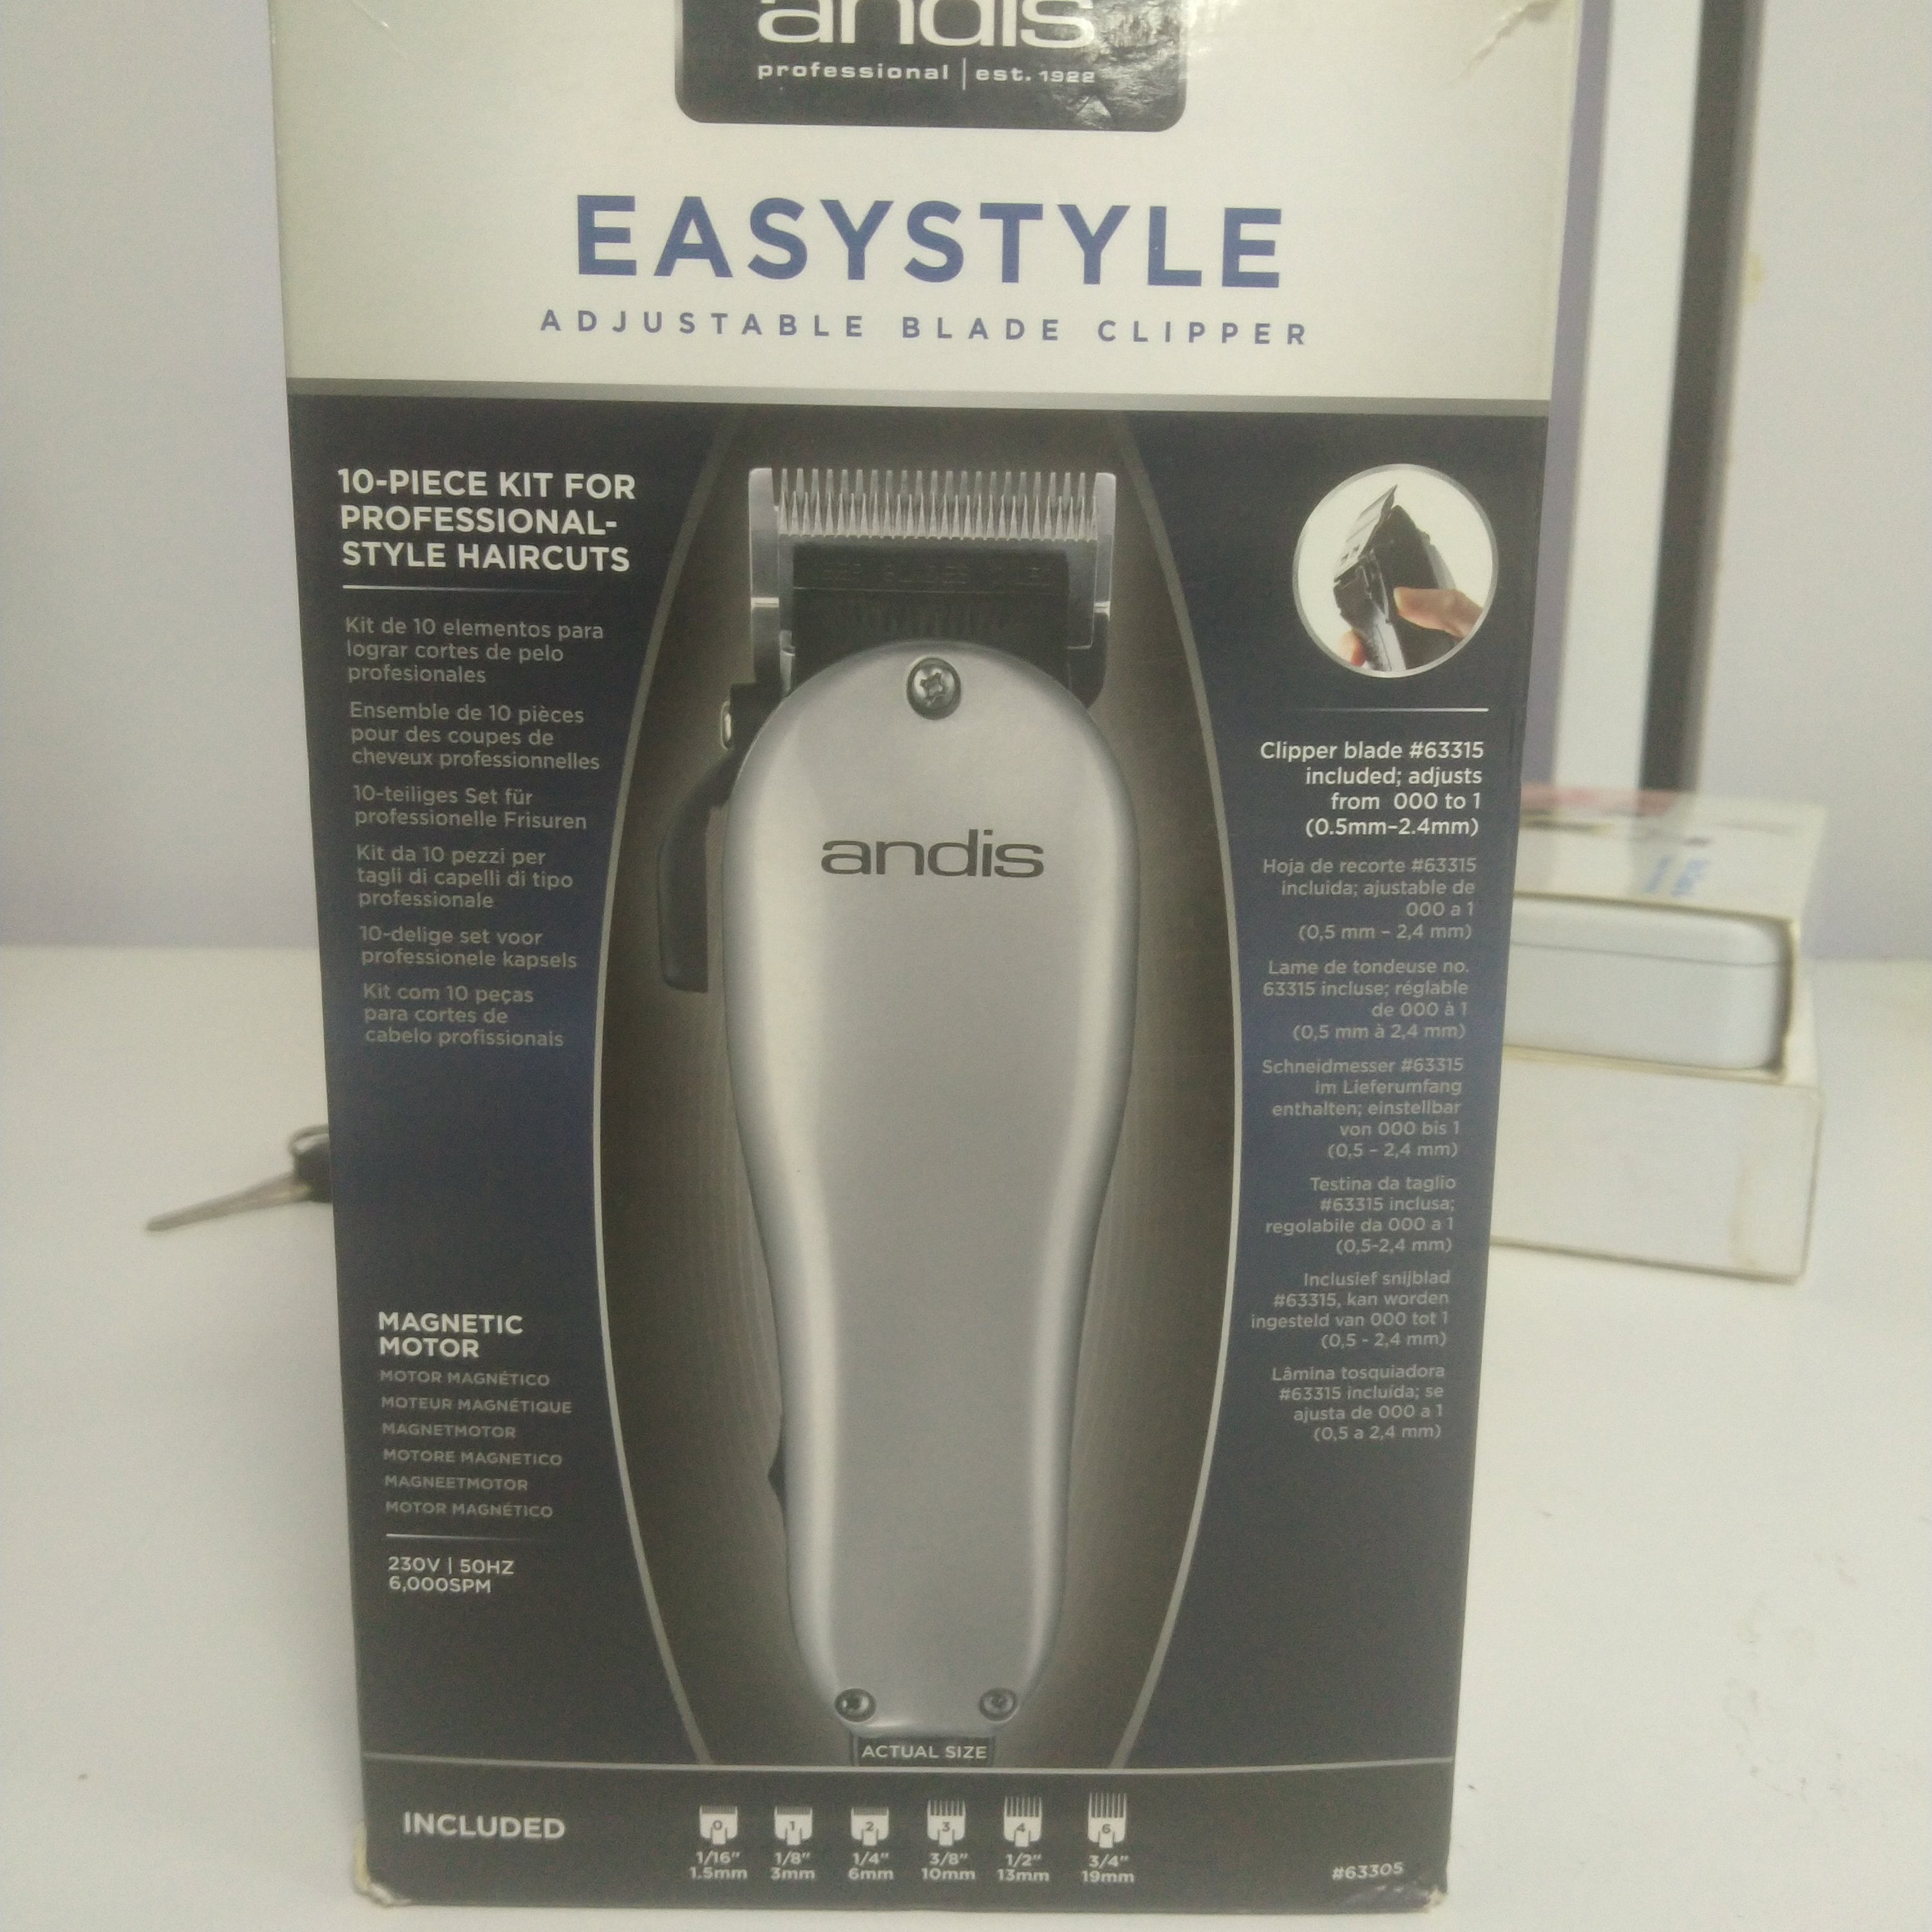 Andis easystyle asjustable blade clipper